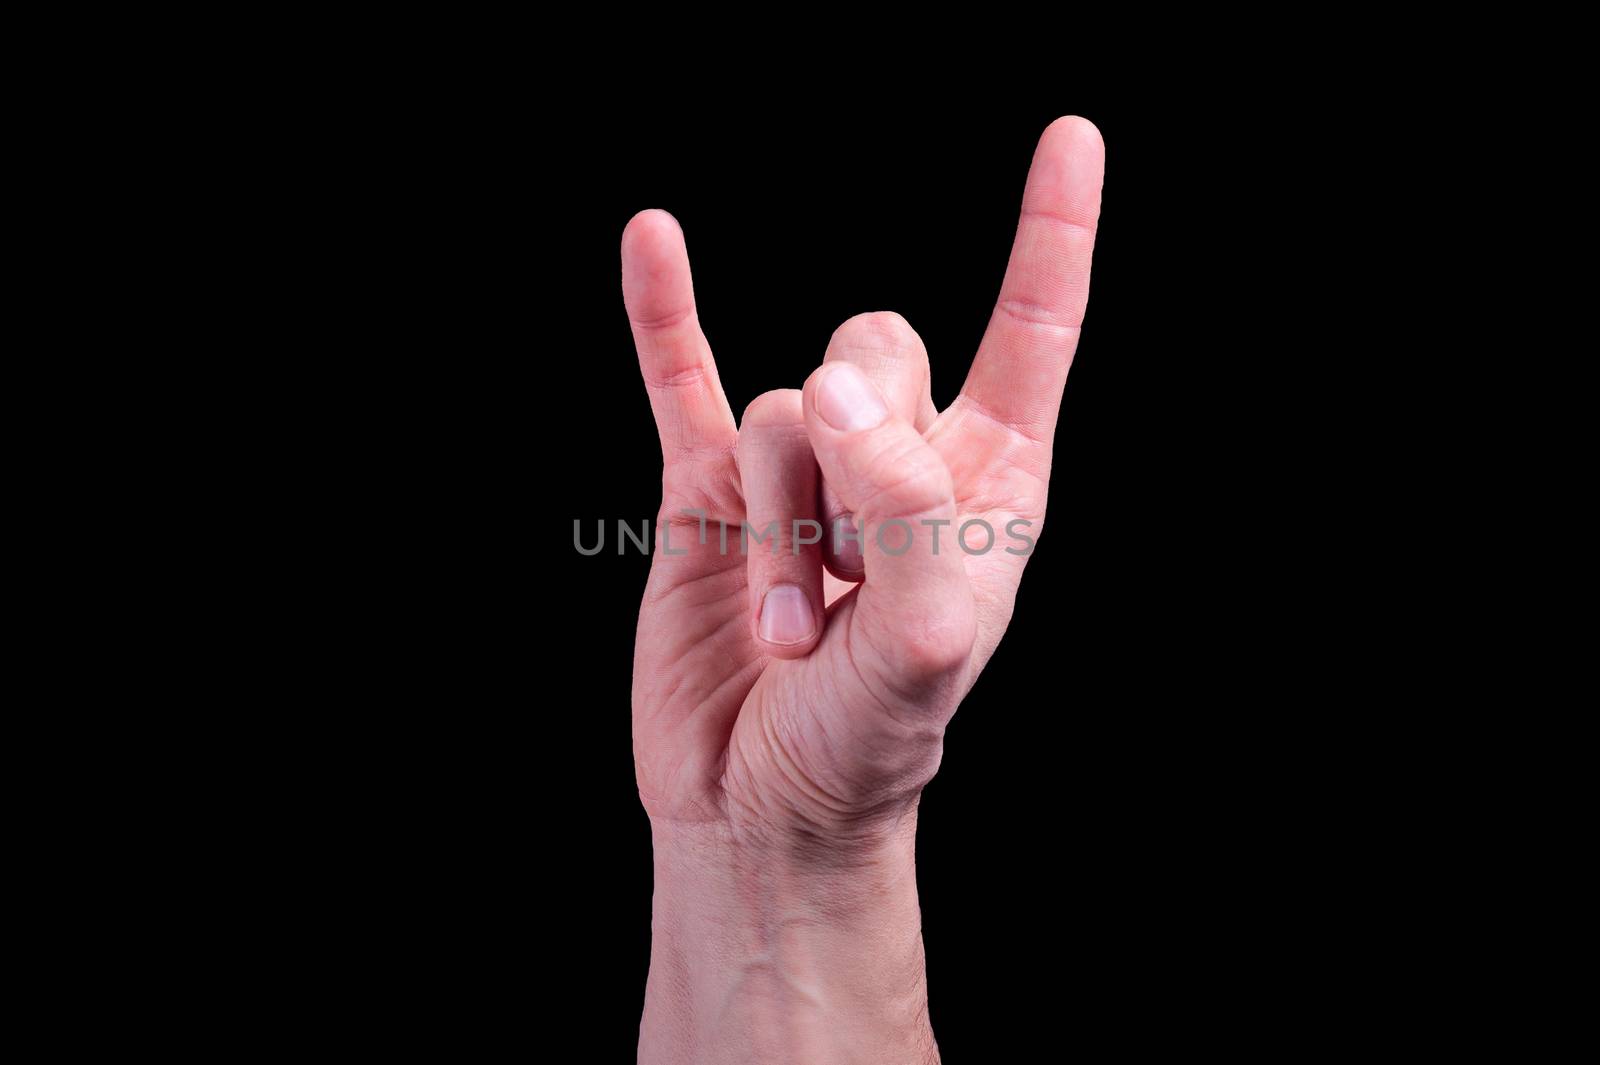 Hand of euroopean human shows the sign of the horns on isolated black background by chernobrovin